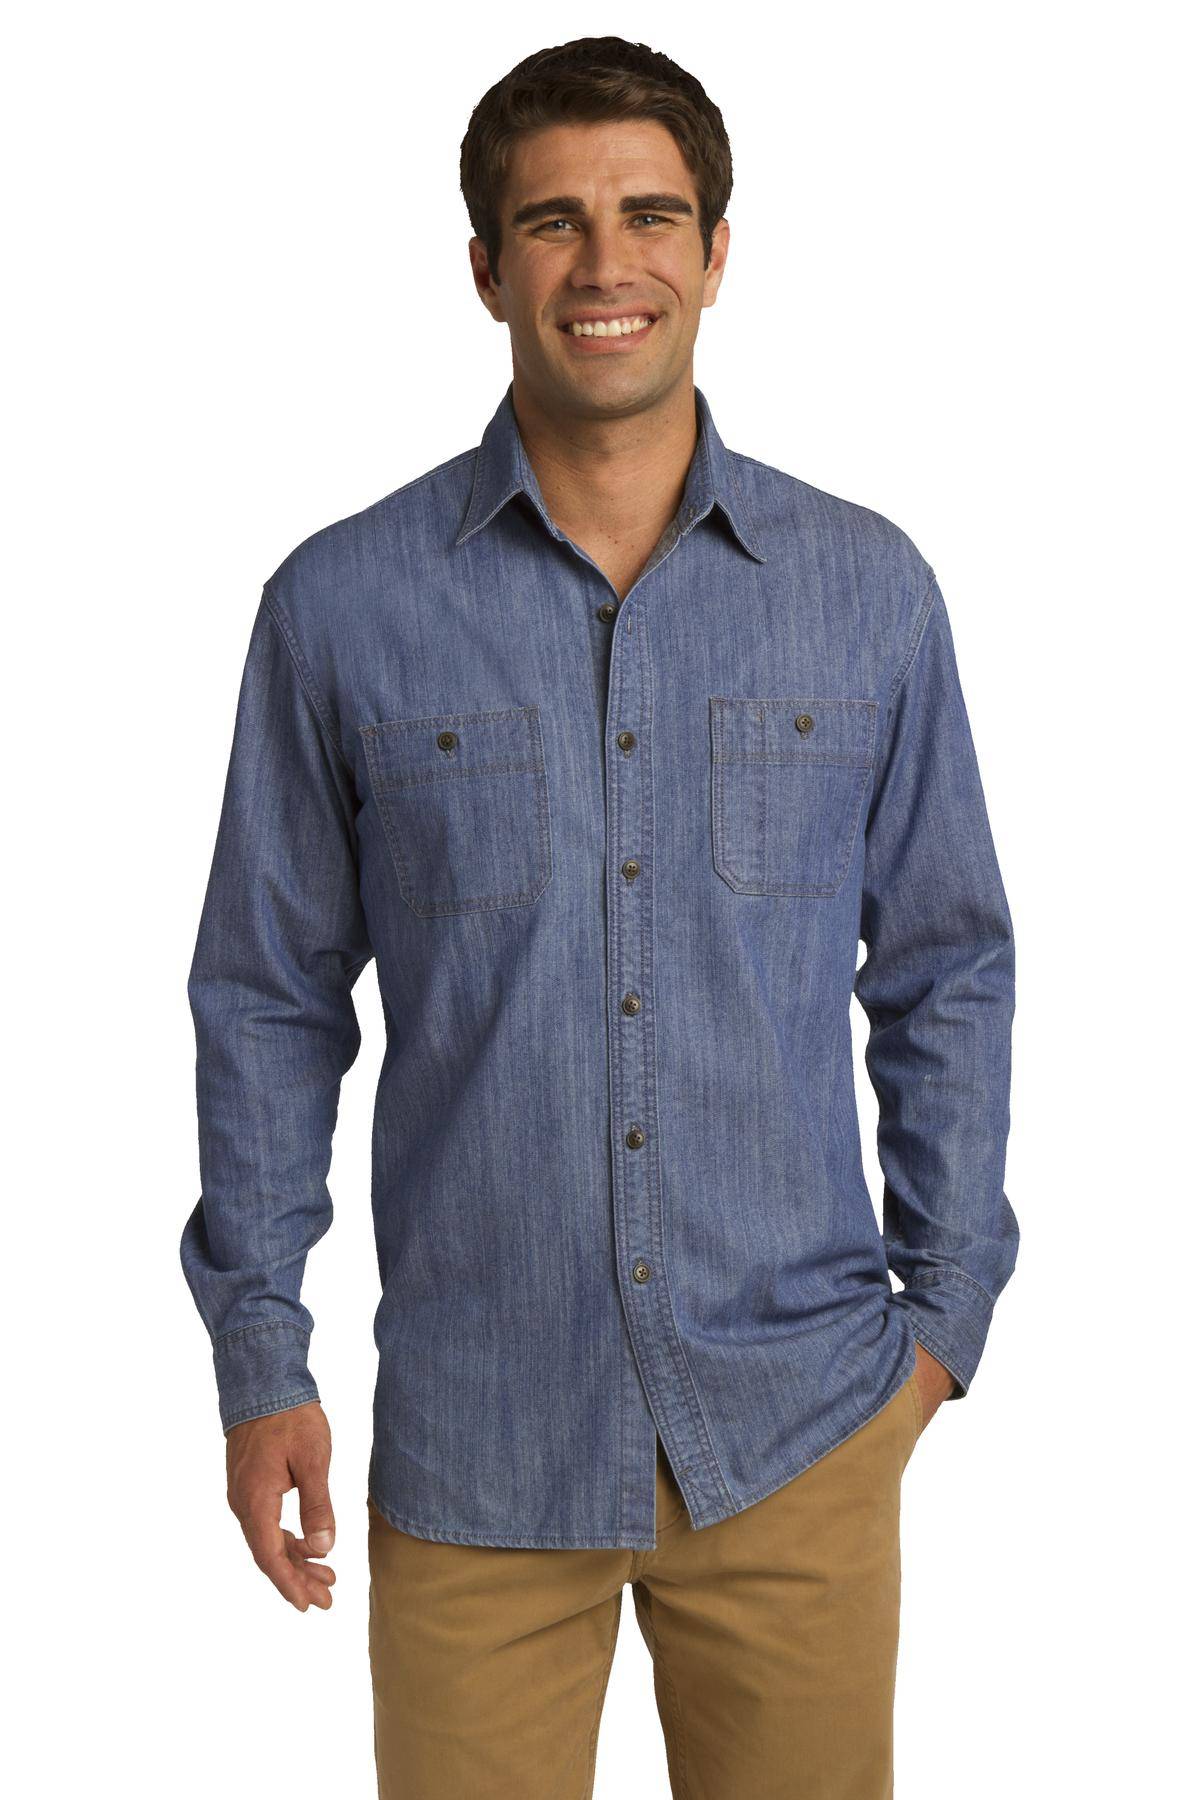 Port Authority S652 Mens Long Sleeve Open Collar Patch Denim Shirt With Pockets